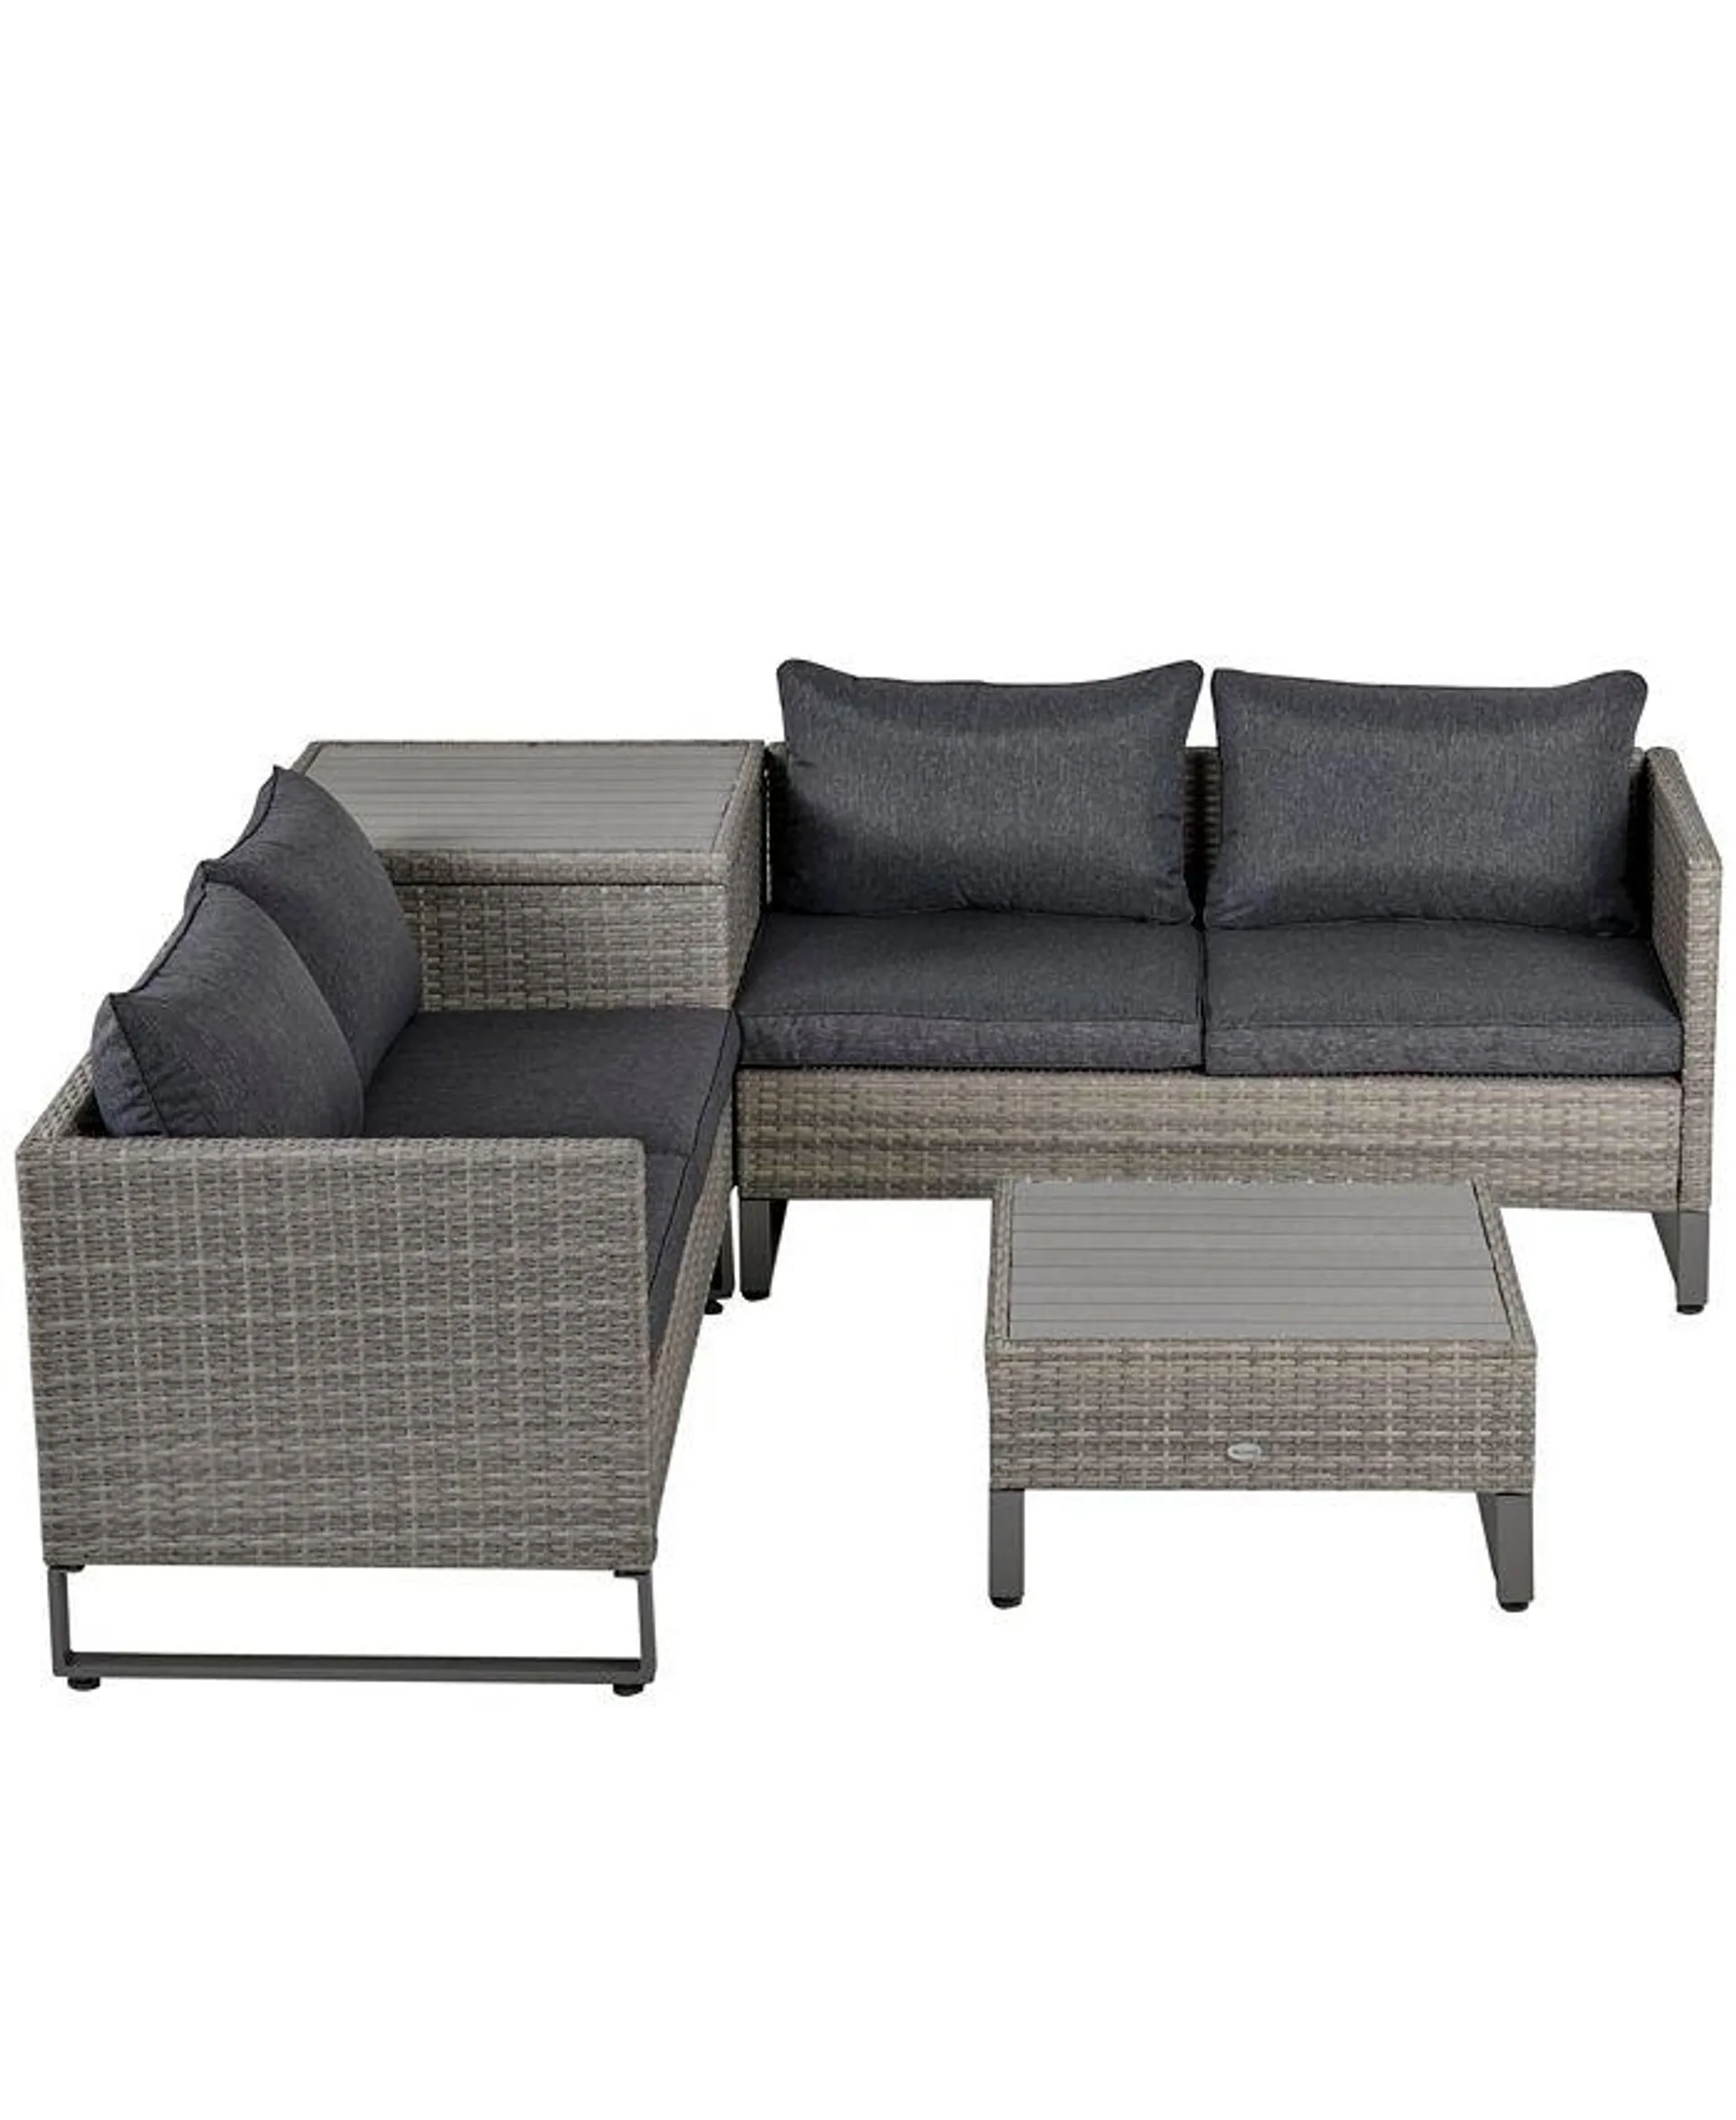 4-Piece Wicker Sofa Sets, Outdoor Conversation Set PE Rattan Furniture Set with Polyester Table Top Tea Table, Steel Frame and Comfort Cushions for Garden, Backyard, Grey